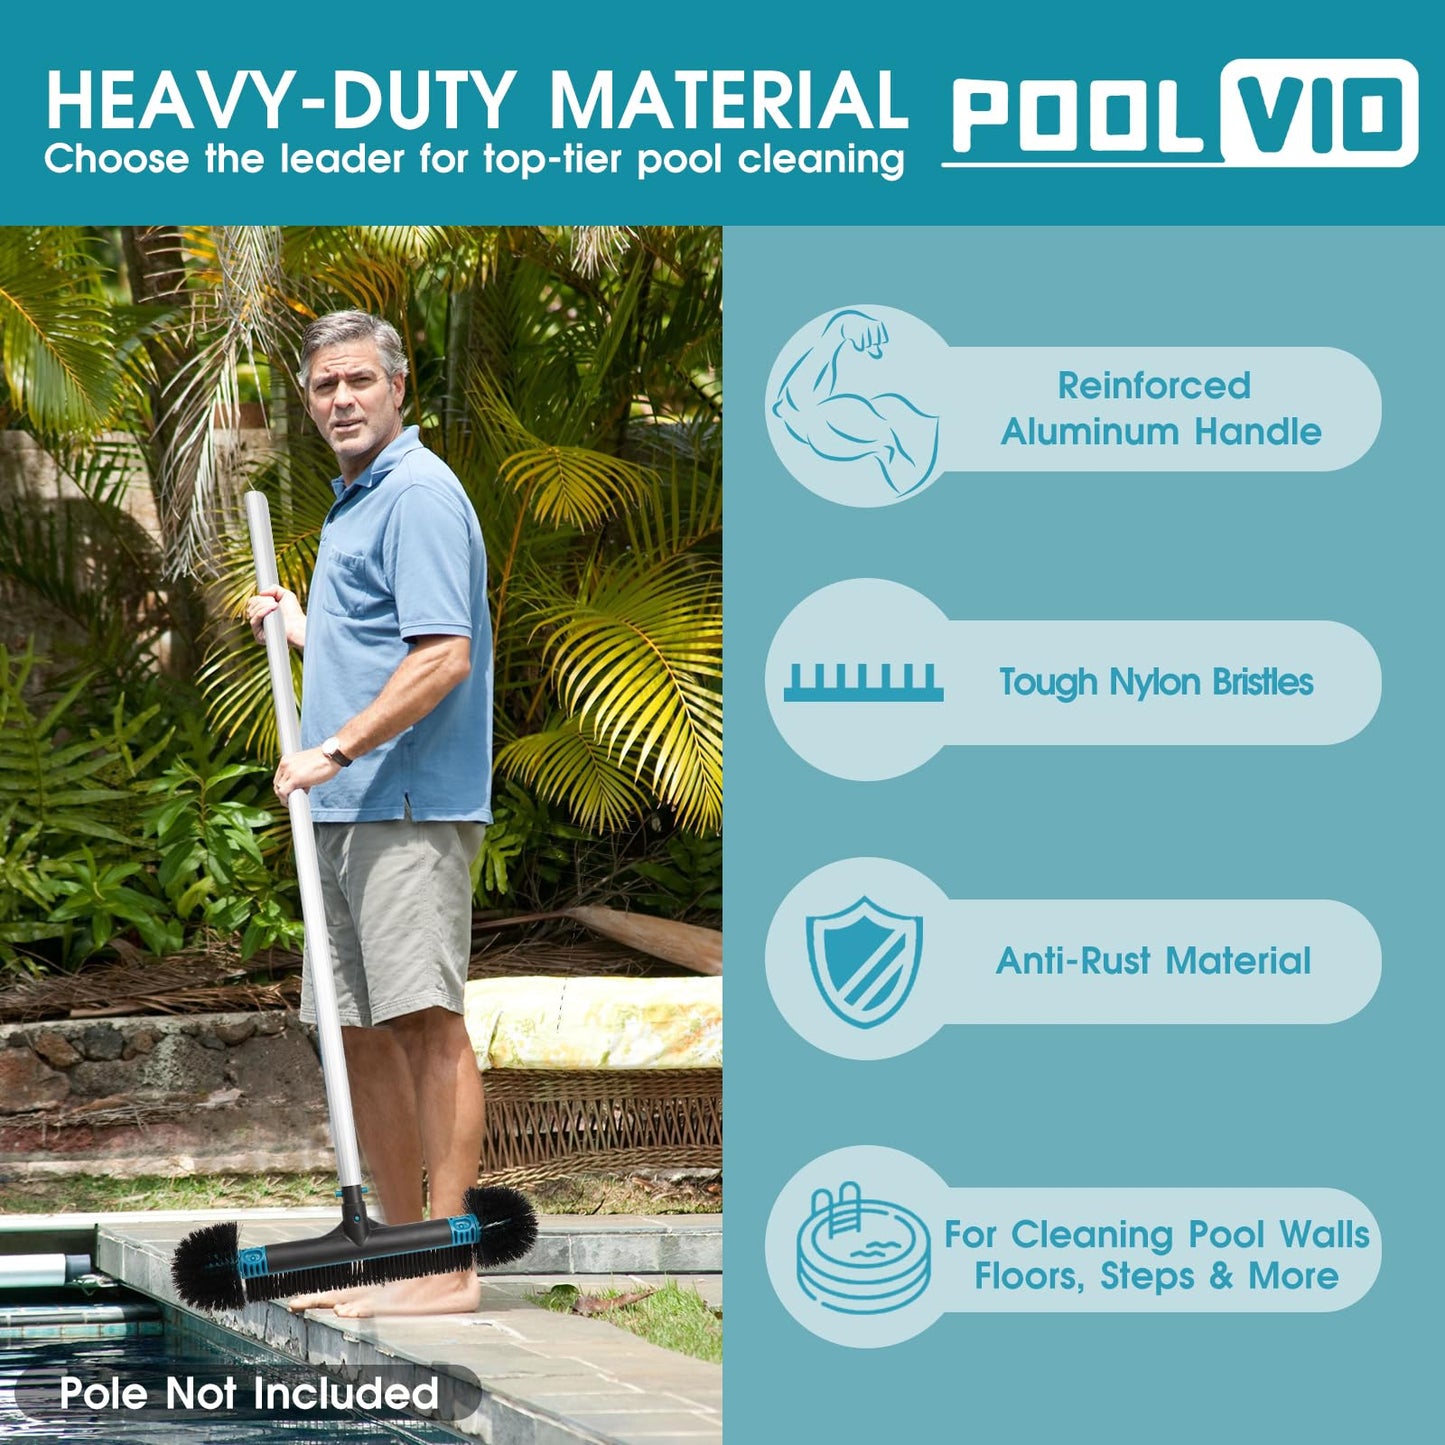 Poolvio 20" 2 in 1 Pool Brush Head for Swimming Pool, Heavy Duty Scrub Brush with EZ Clip & Wavy Nylon Bristles for Cleaning Pool Walls, Floors, Steps (Pole not Included)